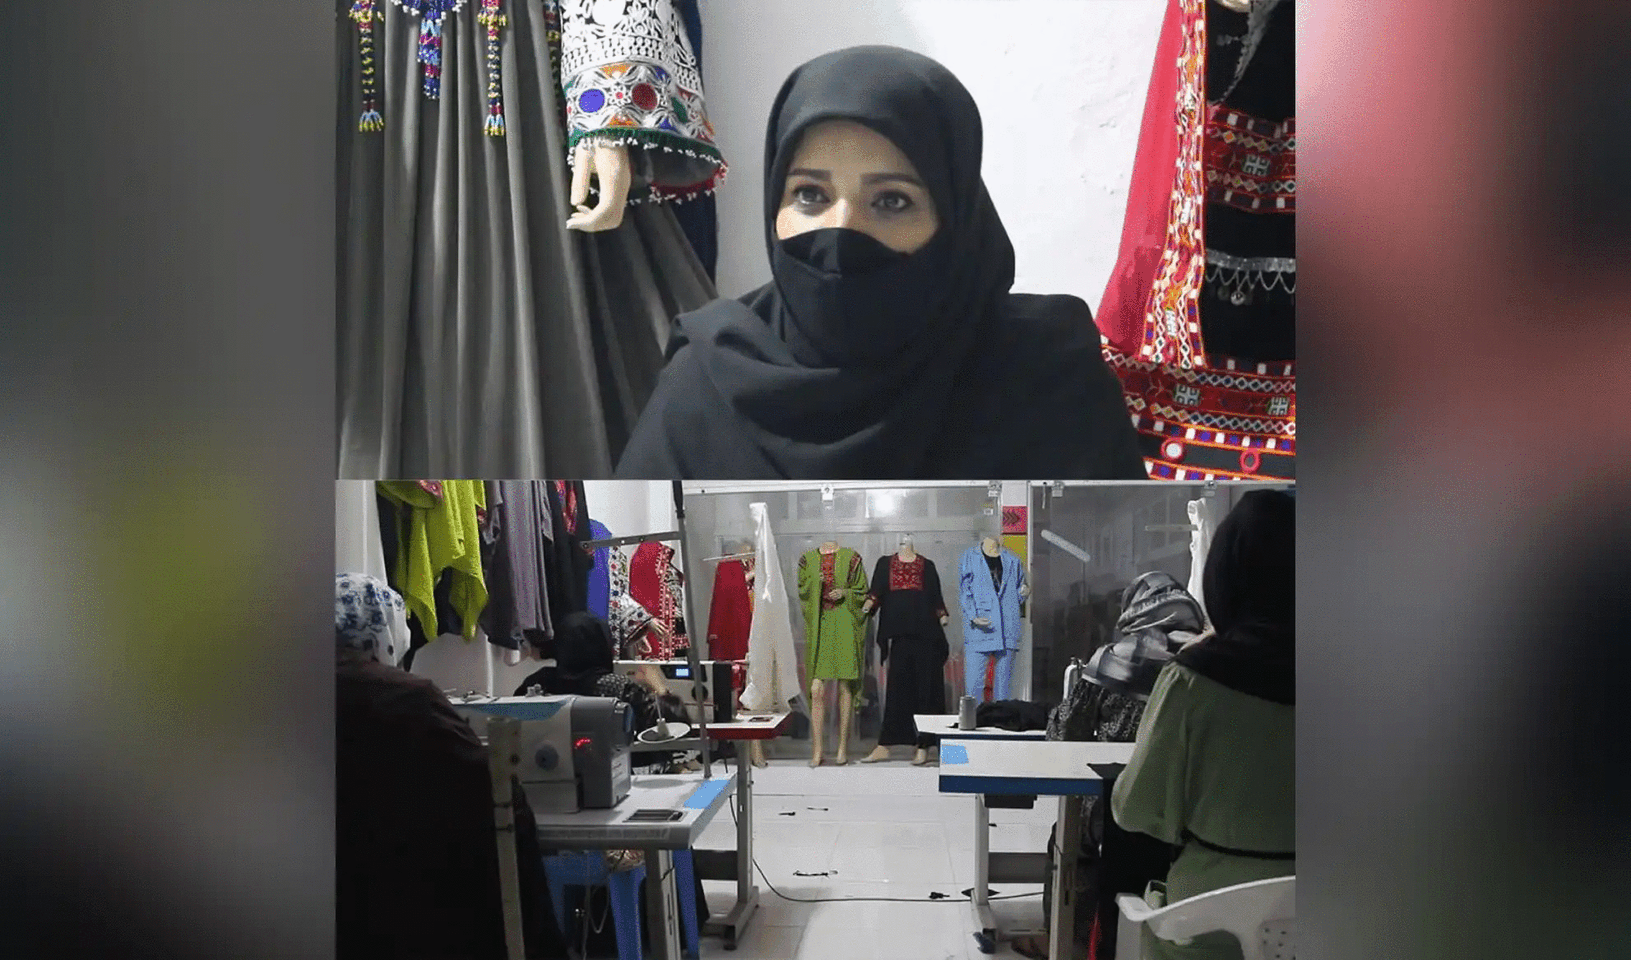 Farzana runs own business, generates opportunities for others